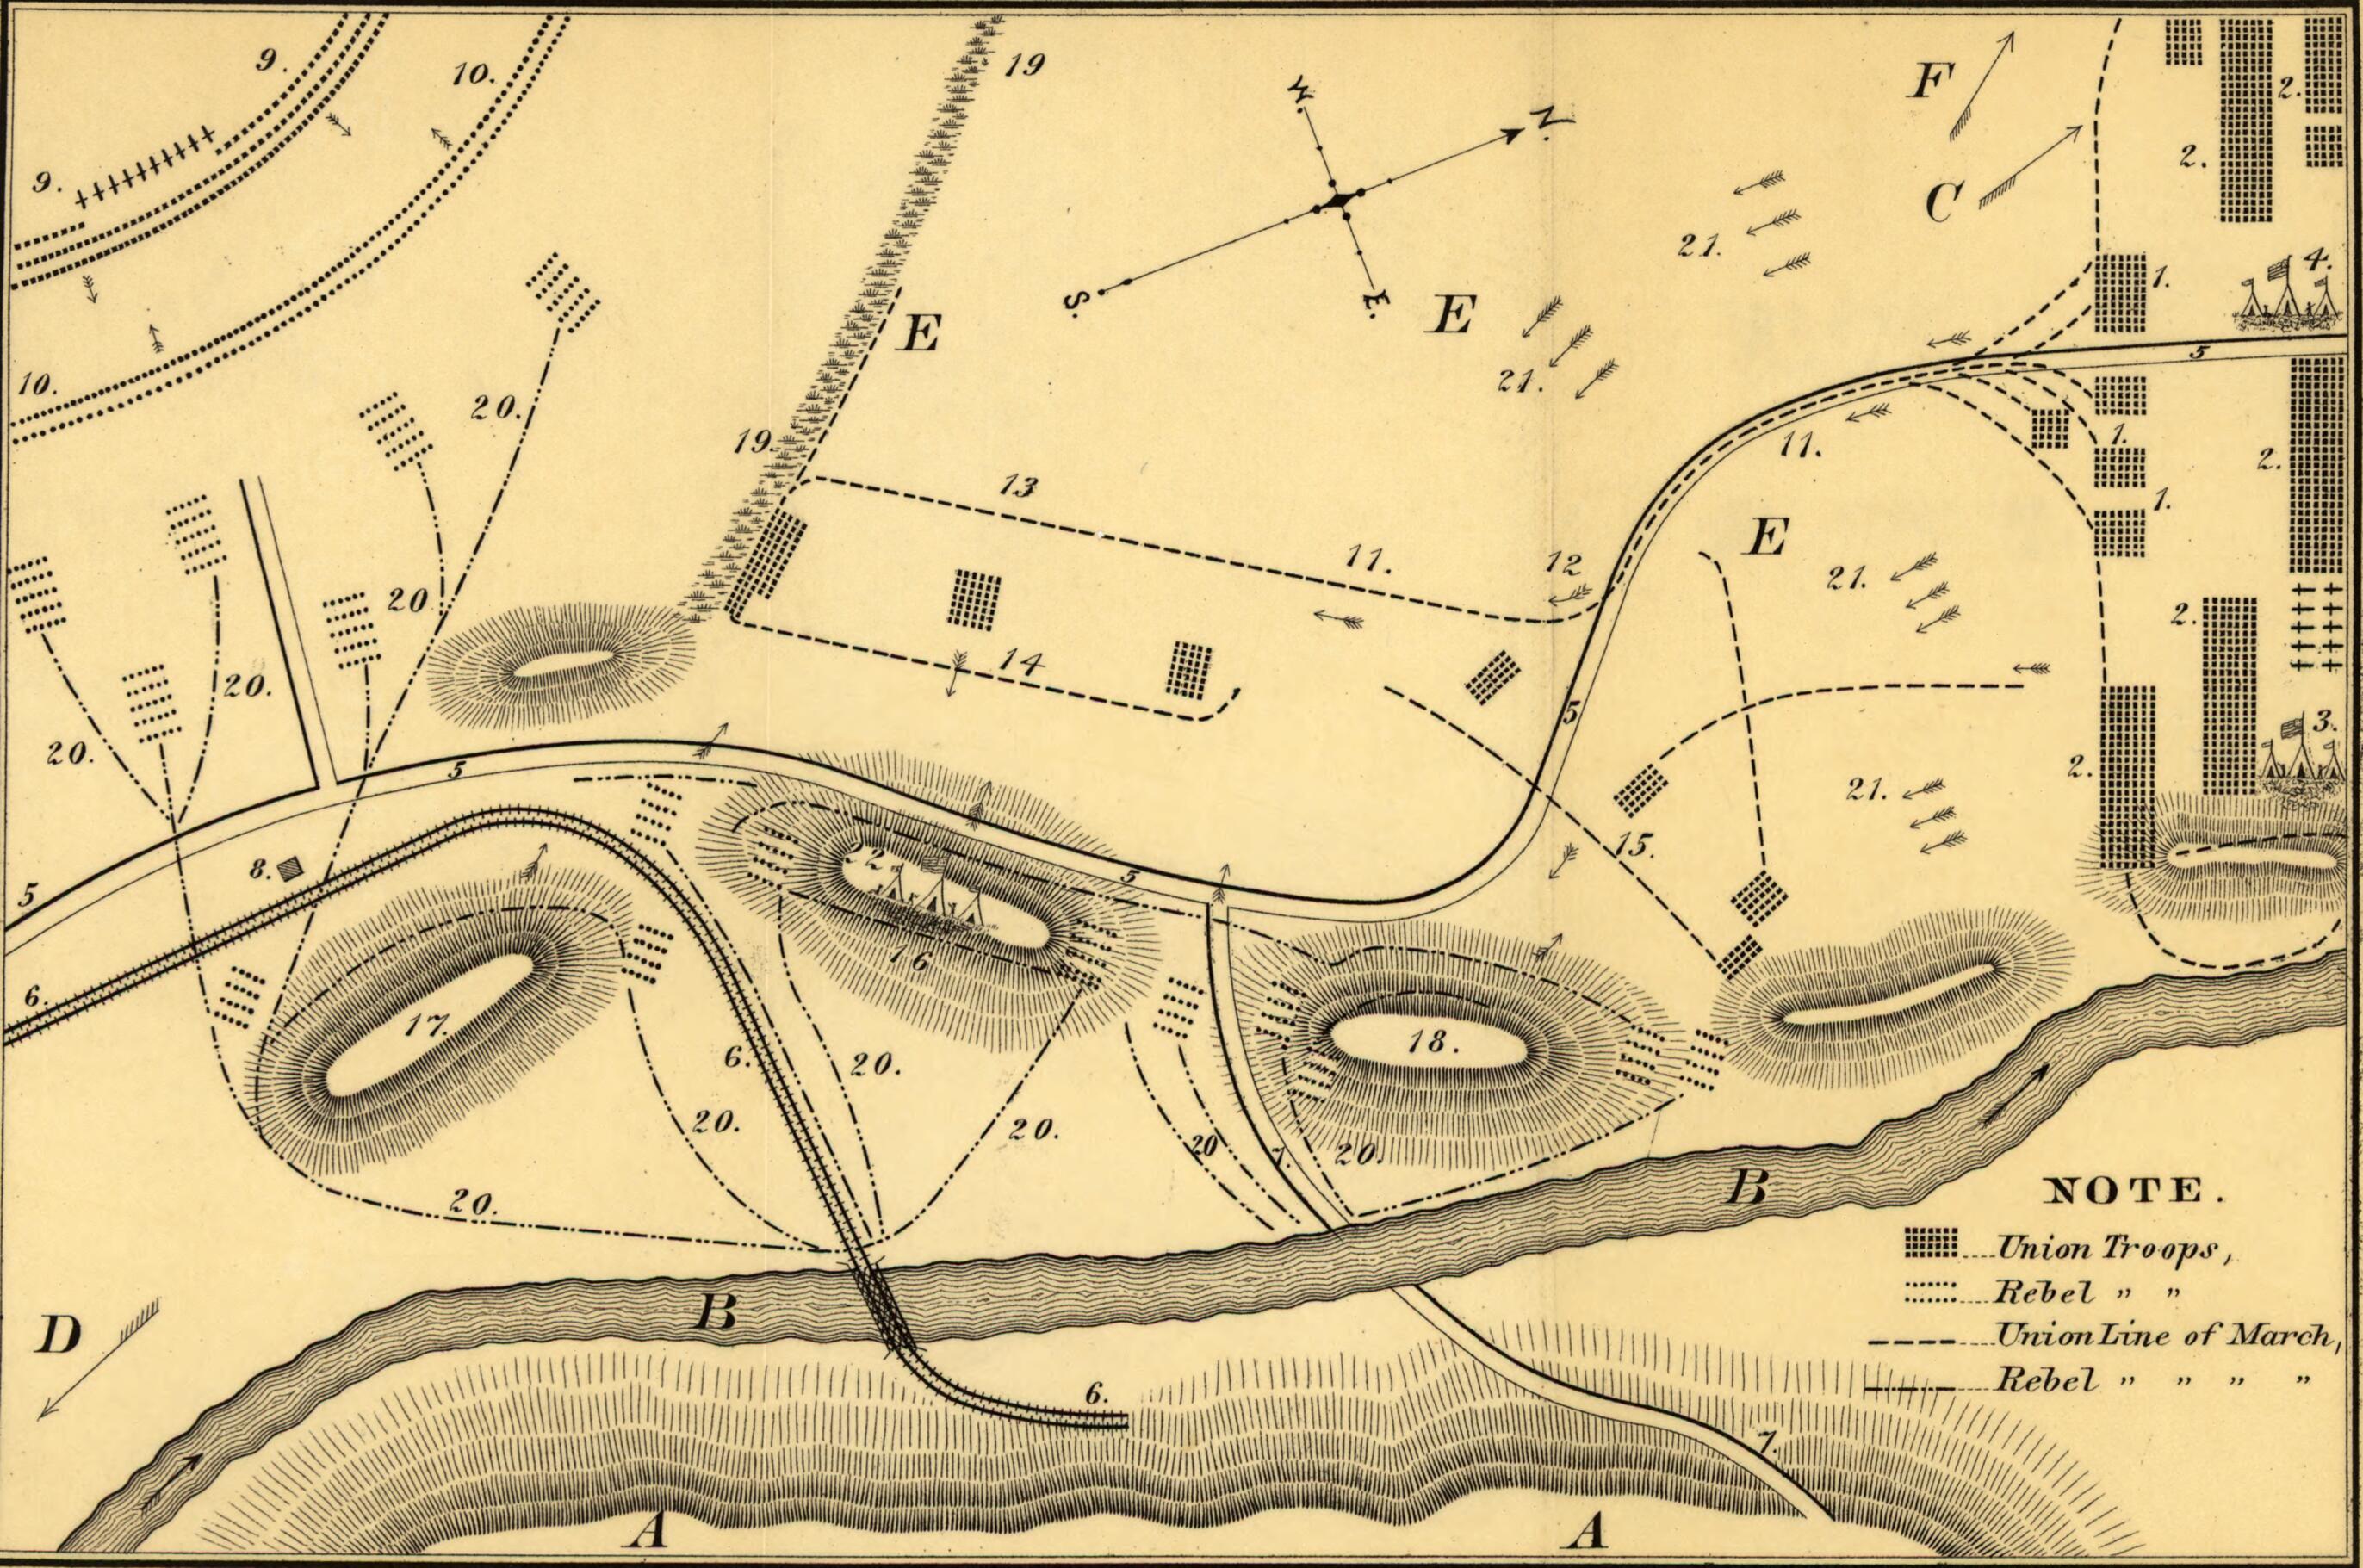 This old map of 29, 1863 from 1882 was created by Hector Tyndale in 1882